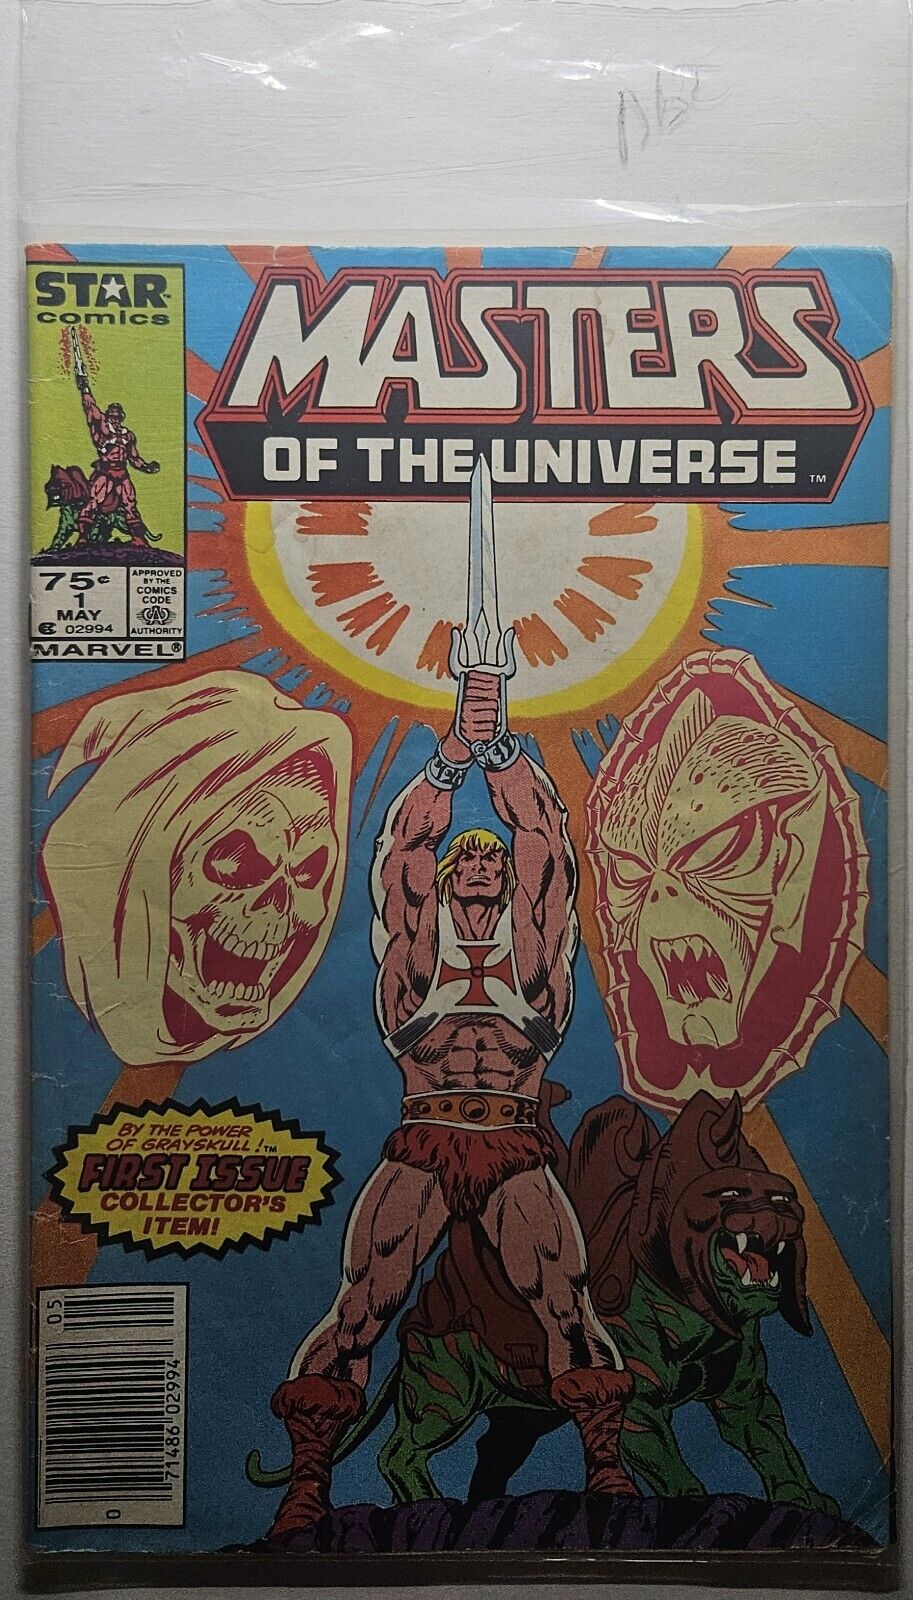 MASTERS OF THE UNIVERSE #1 (1986) MARVEL STAR COMICS